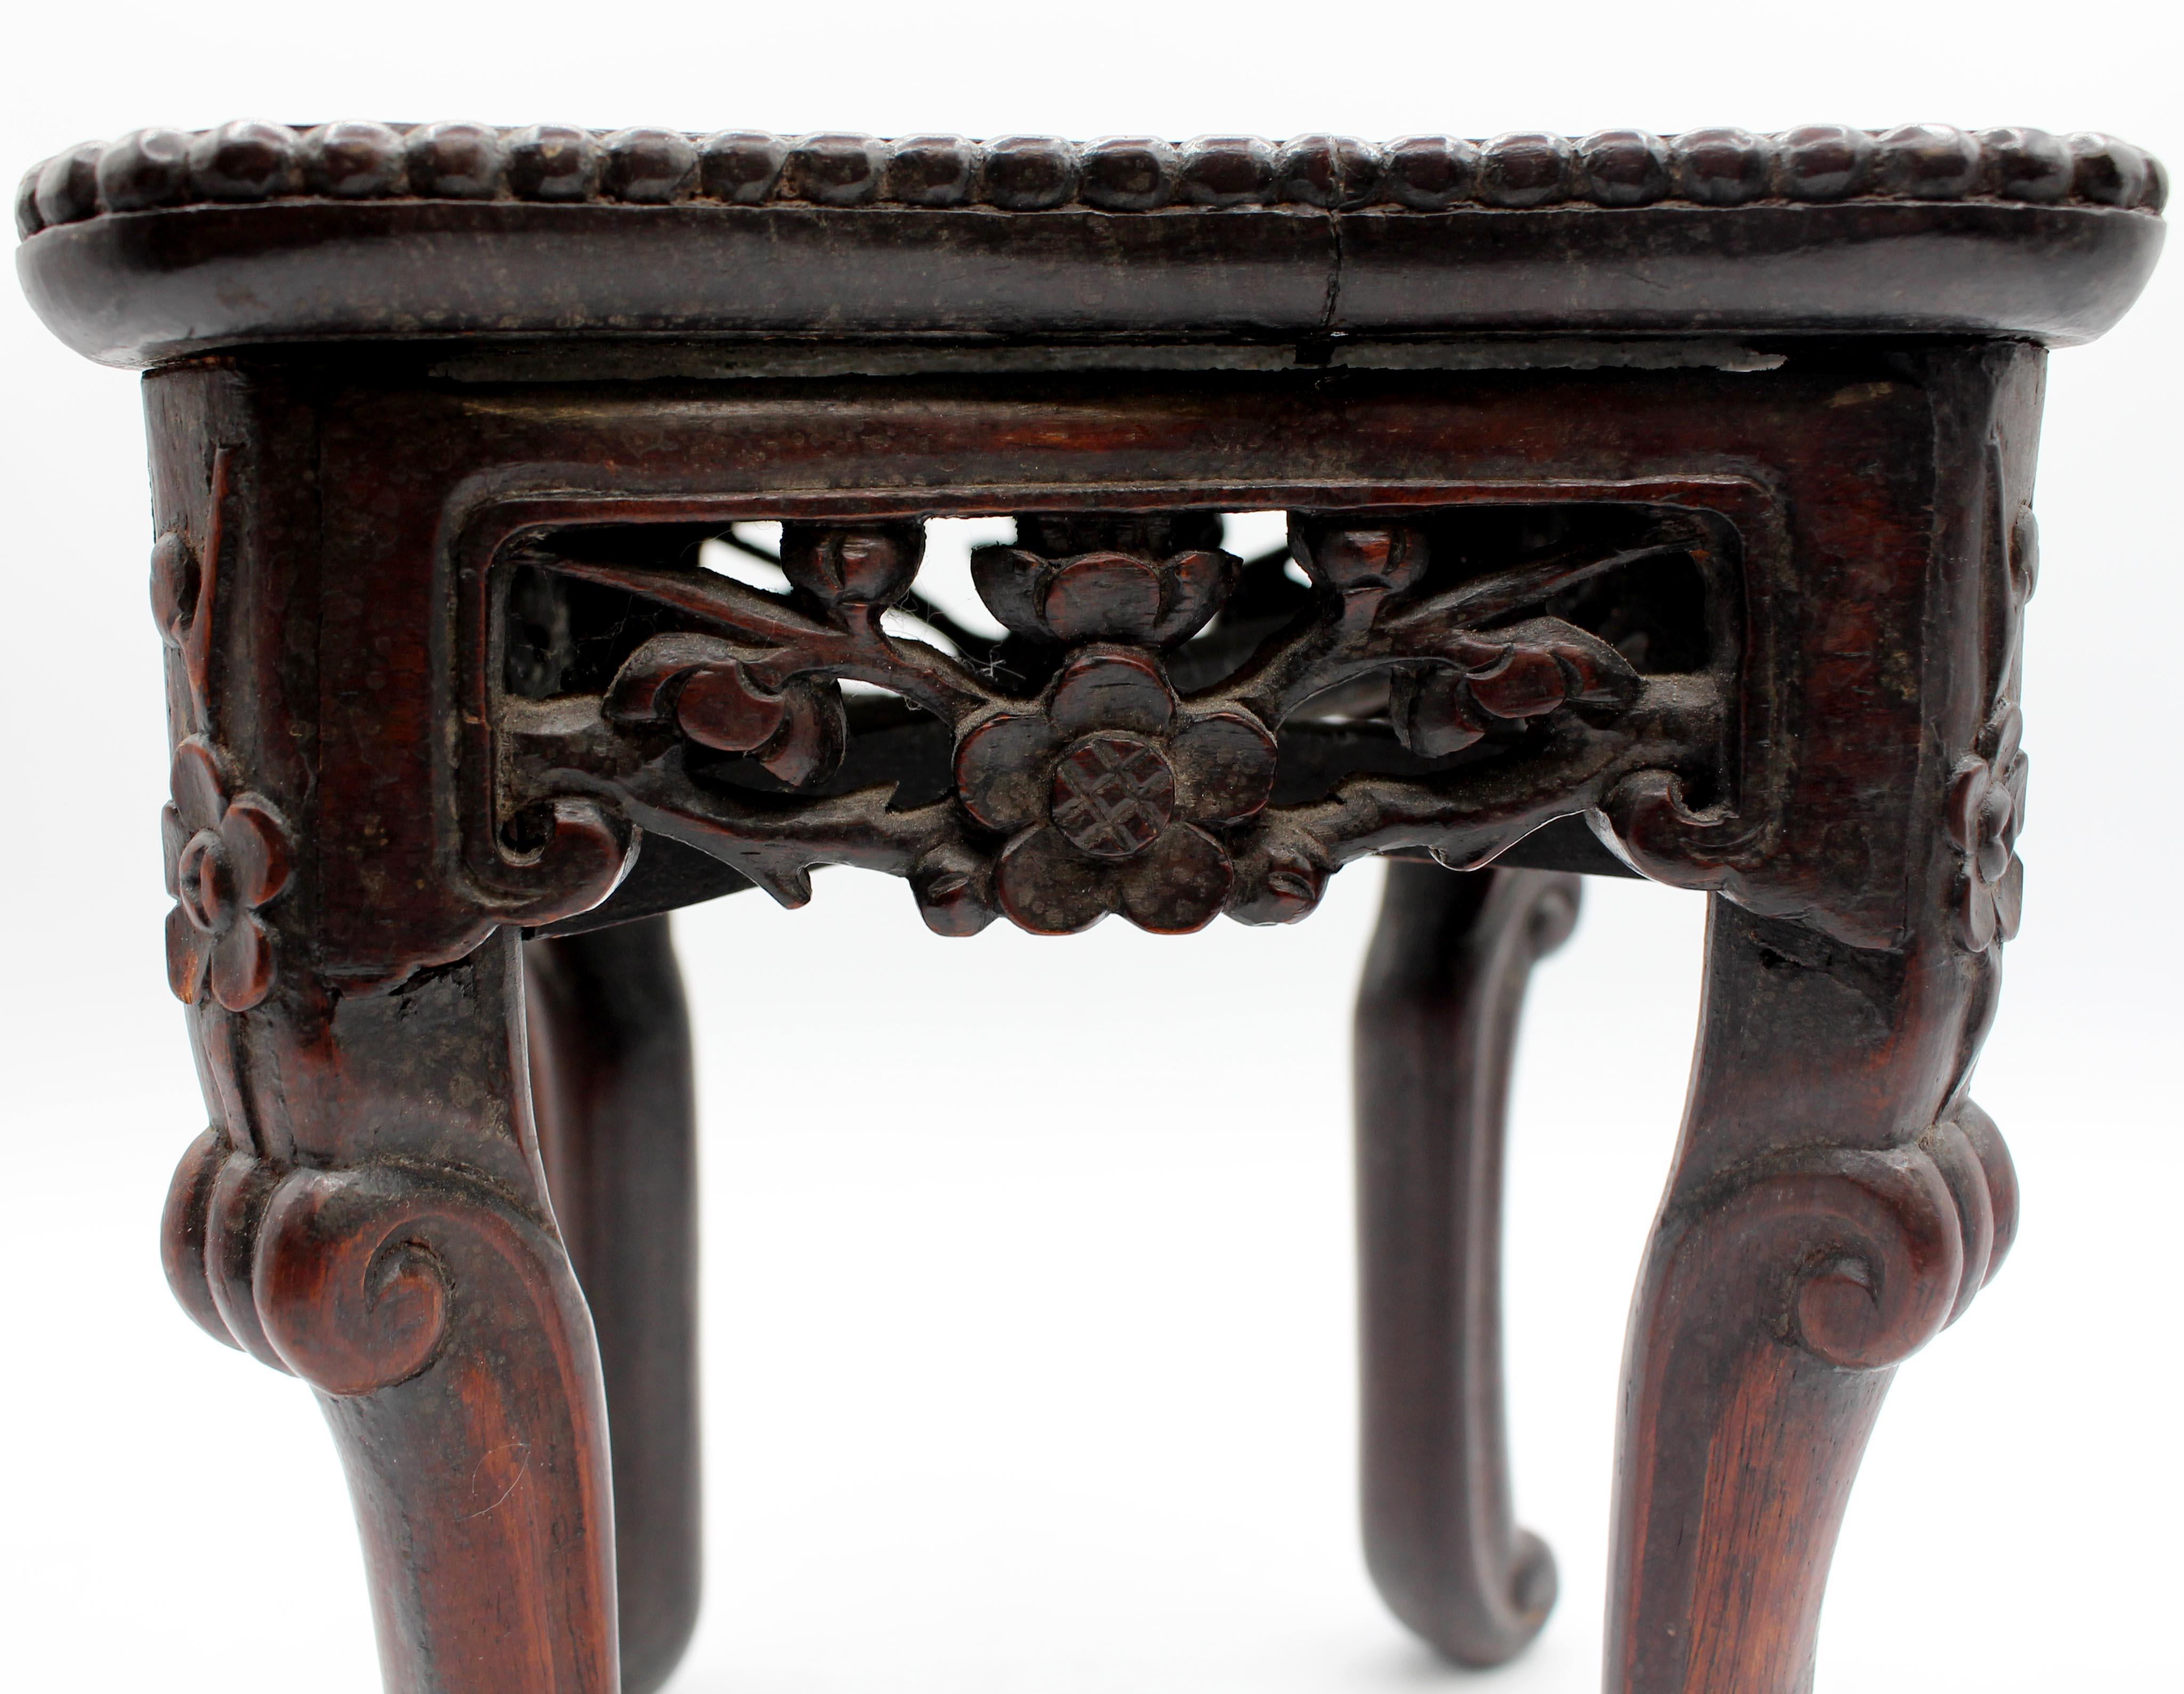 Wood 3rd Quarter 19th Century Miniature Taboret Table For Sale